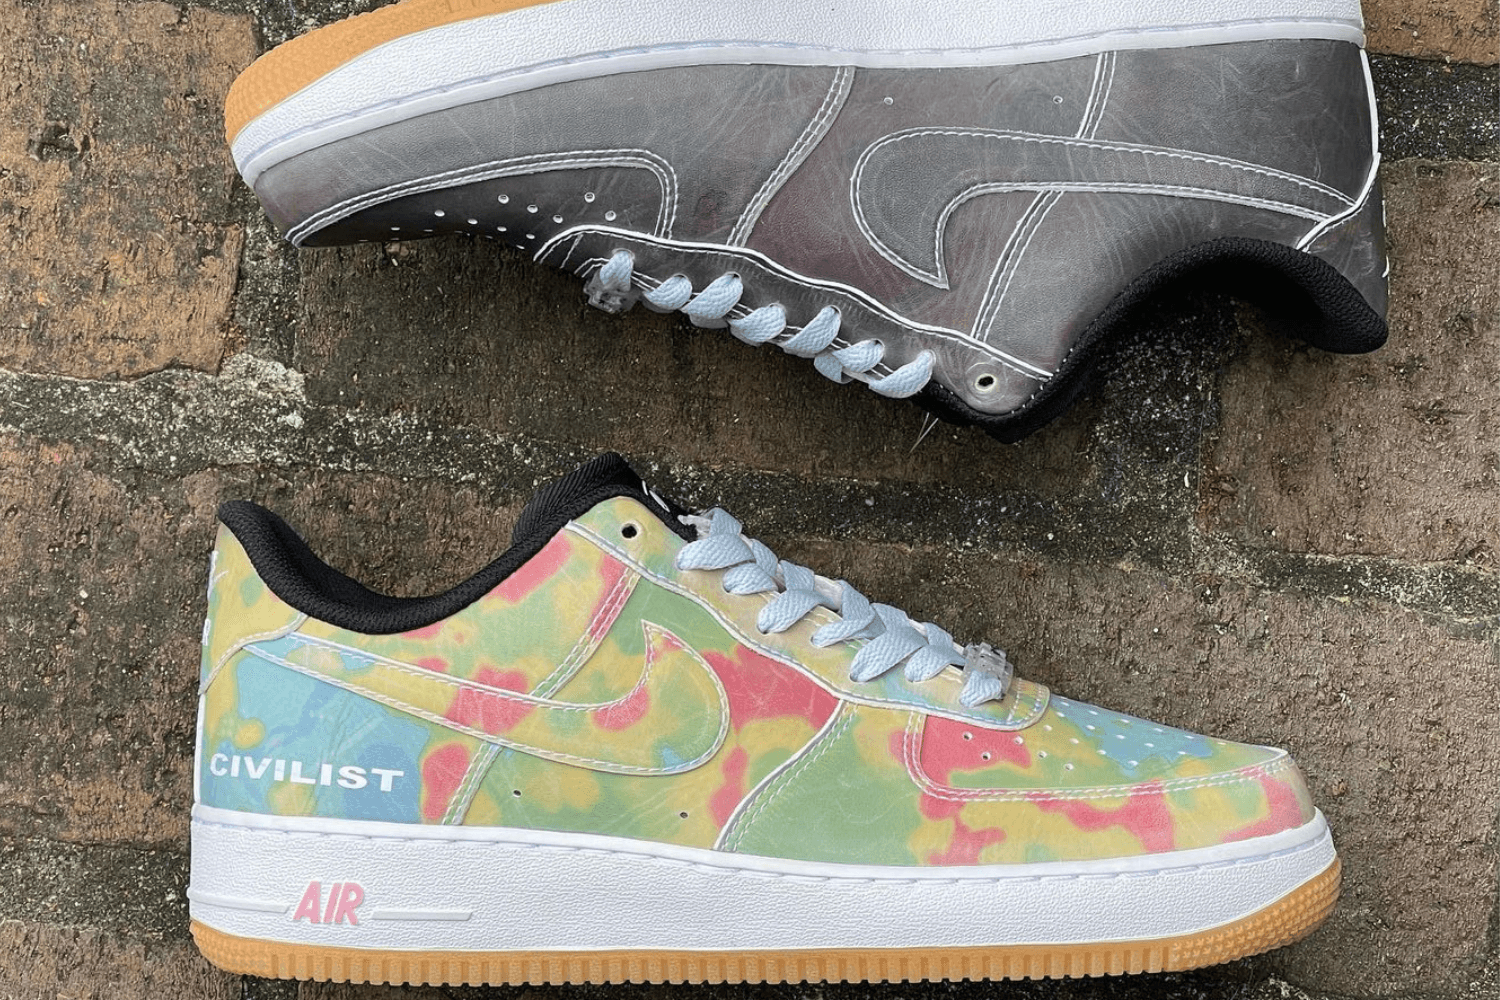 Civilist x Nike Air Force 1 Low collab will drop soon